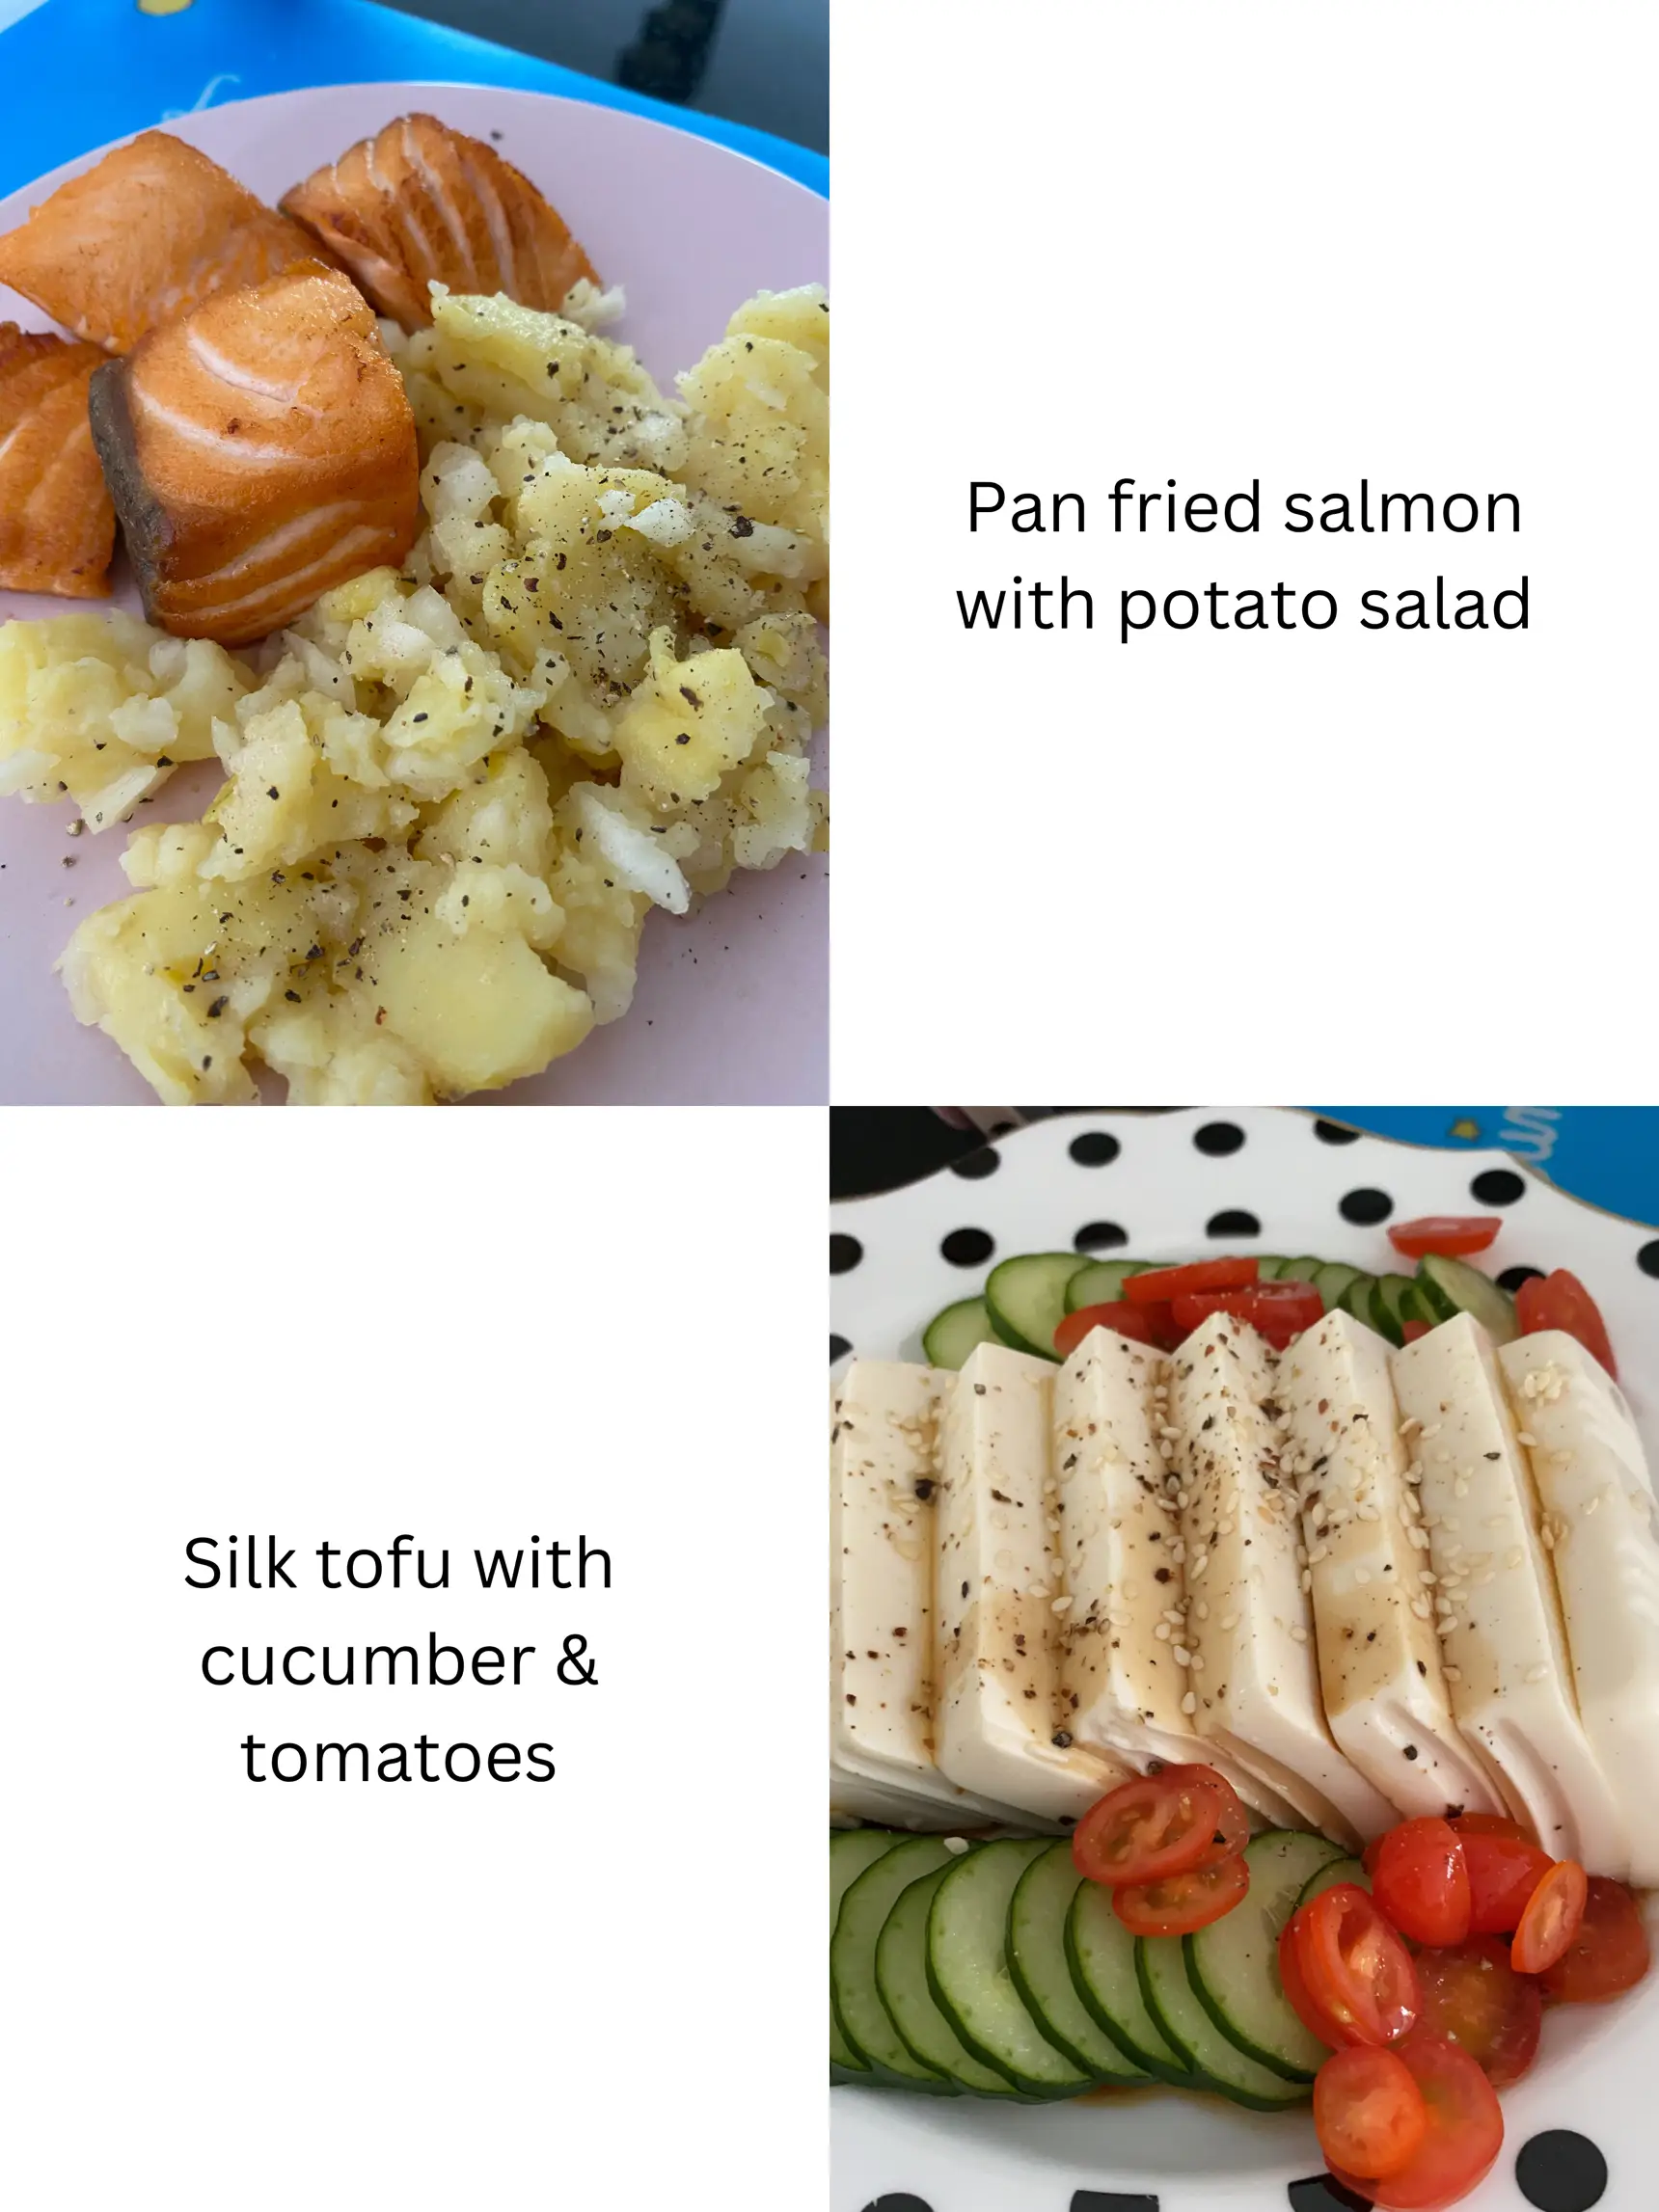 Easy lunch recipes that helped me lose 8kg 💪🏻's images(8)